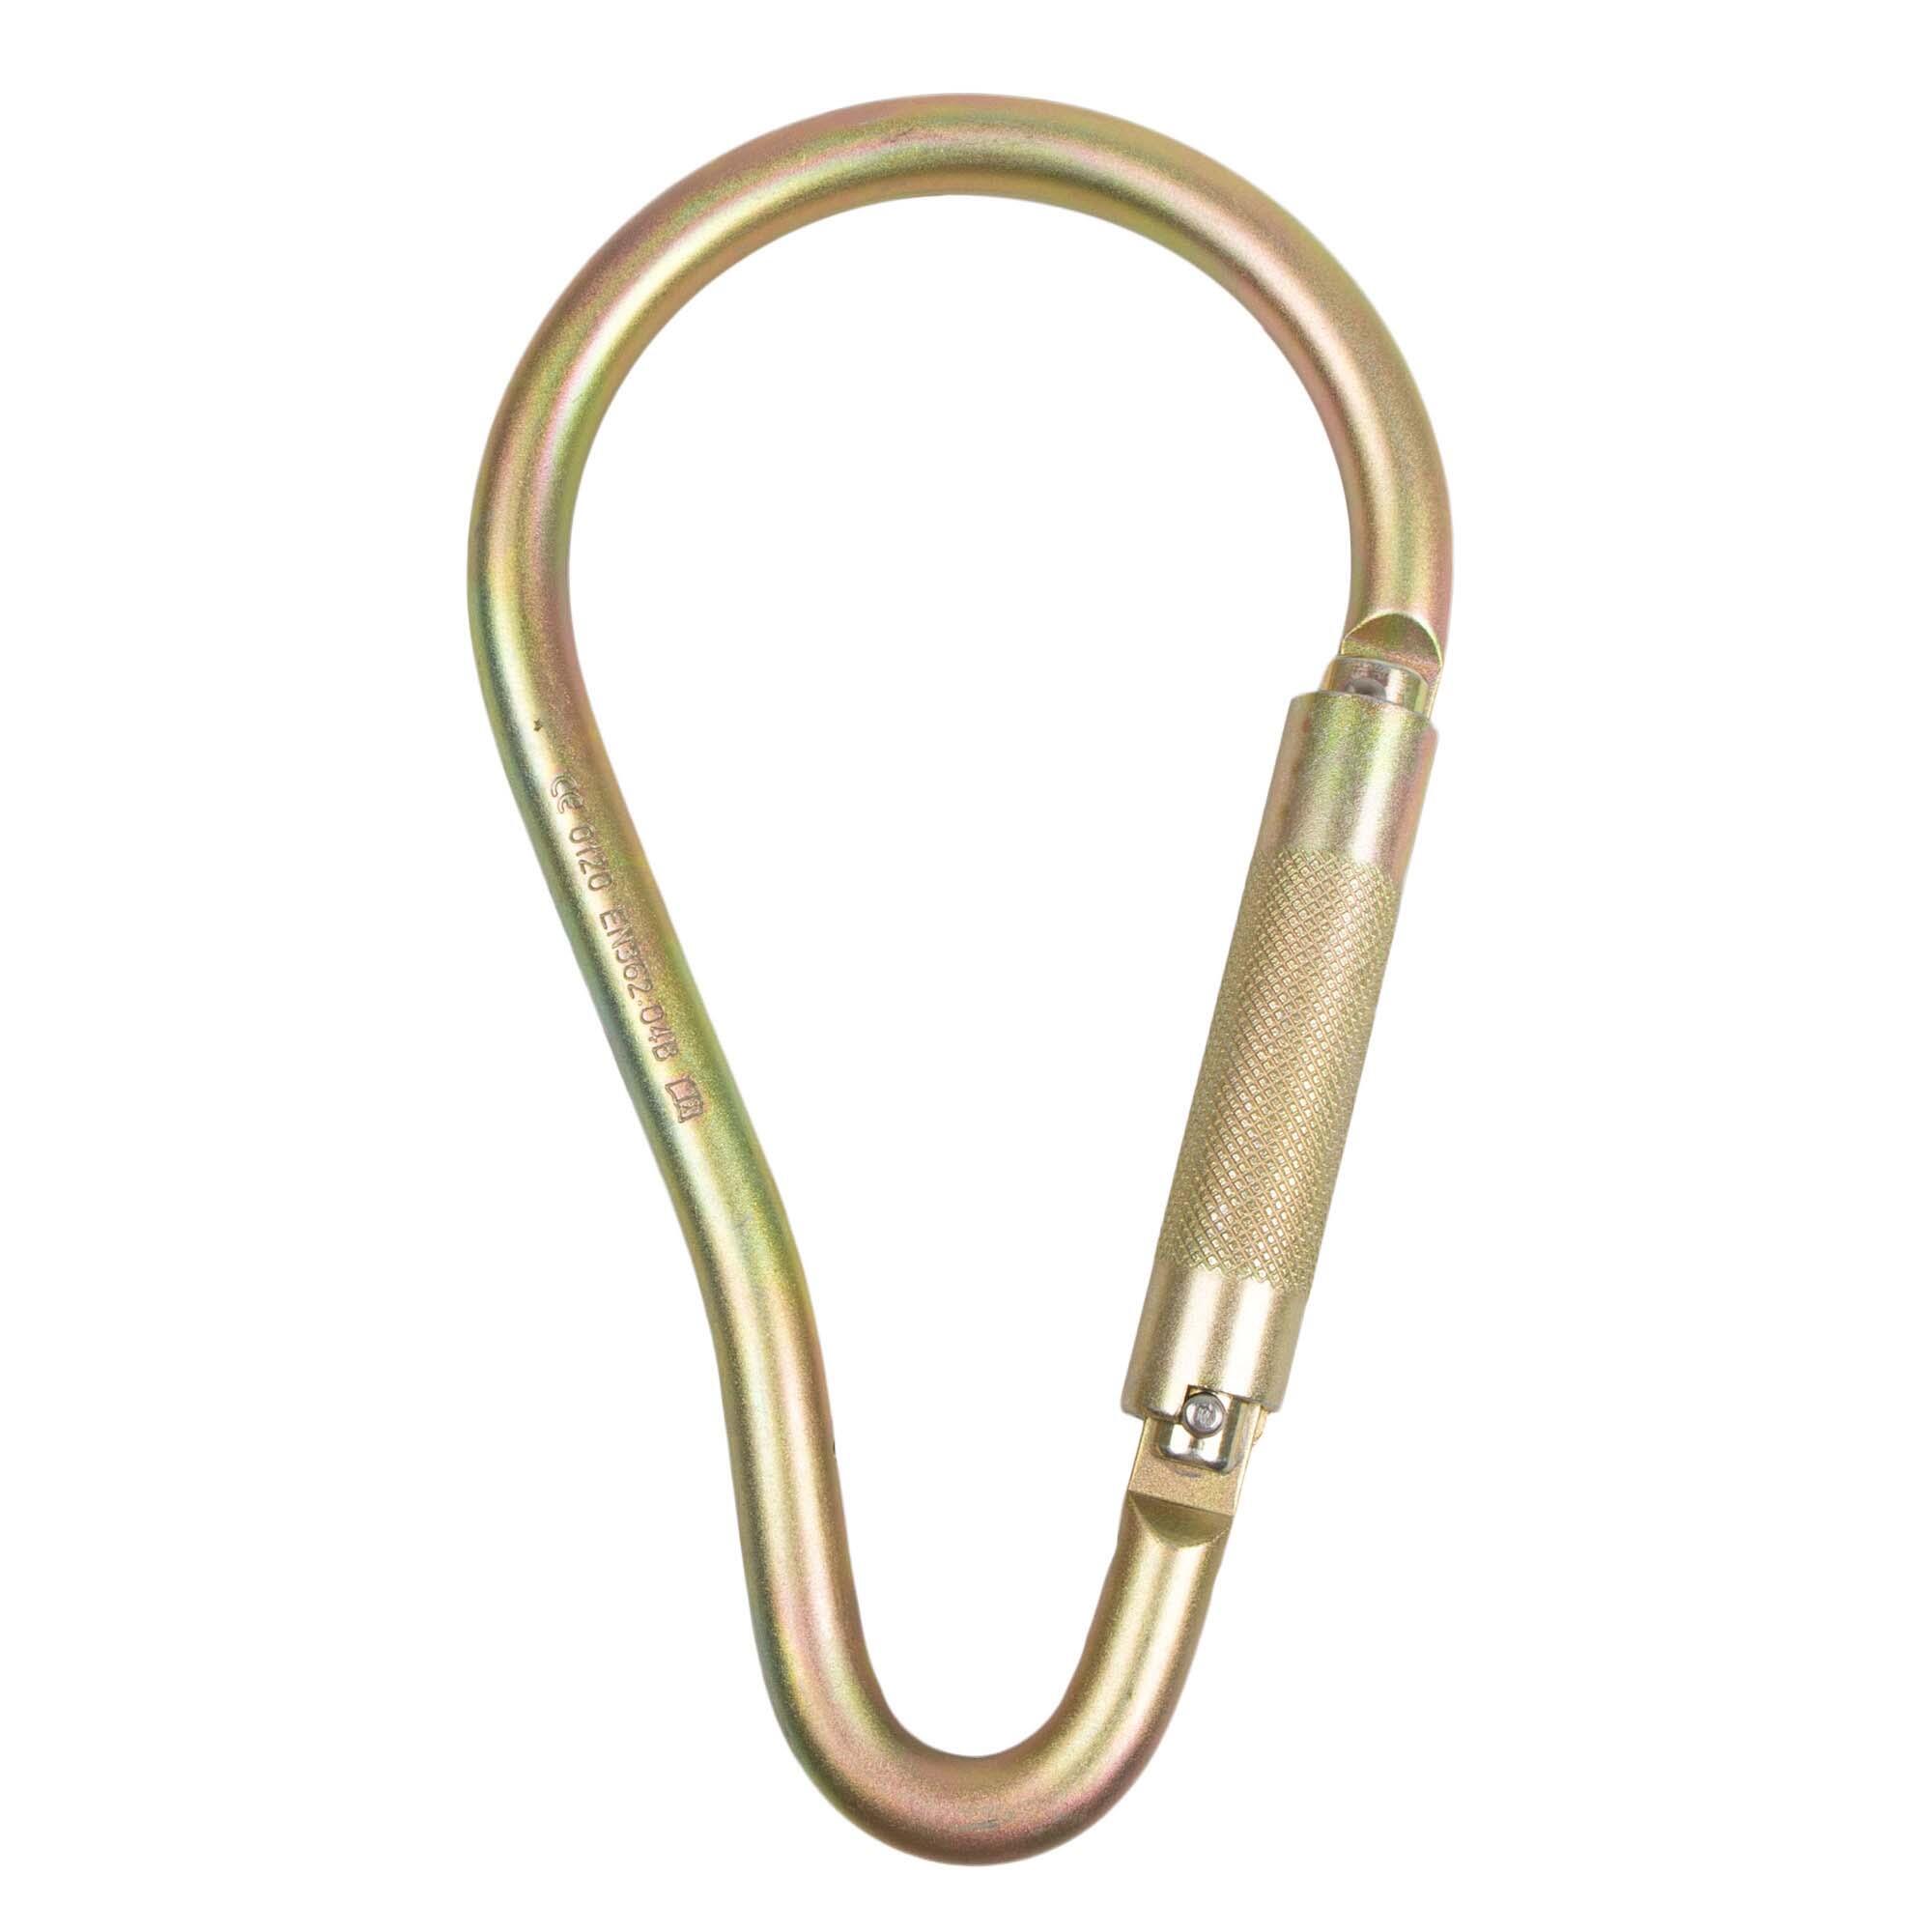 FIRETOYS ISC KH407 Pear-Shaped Large Carabiner